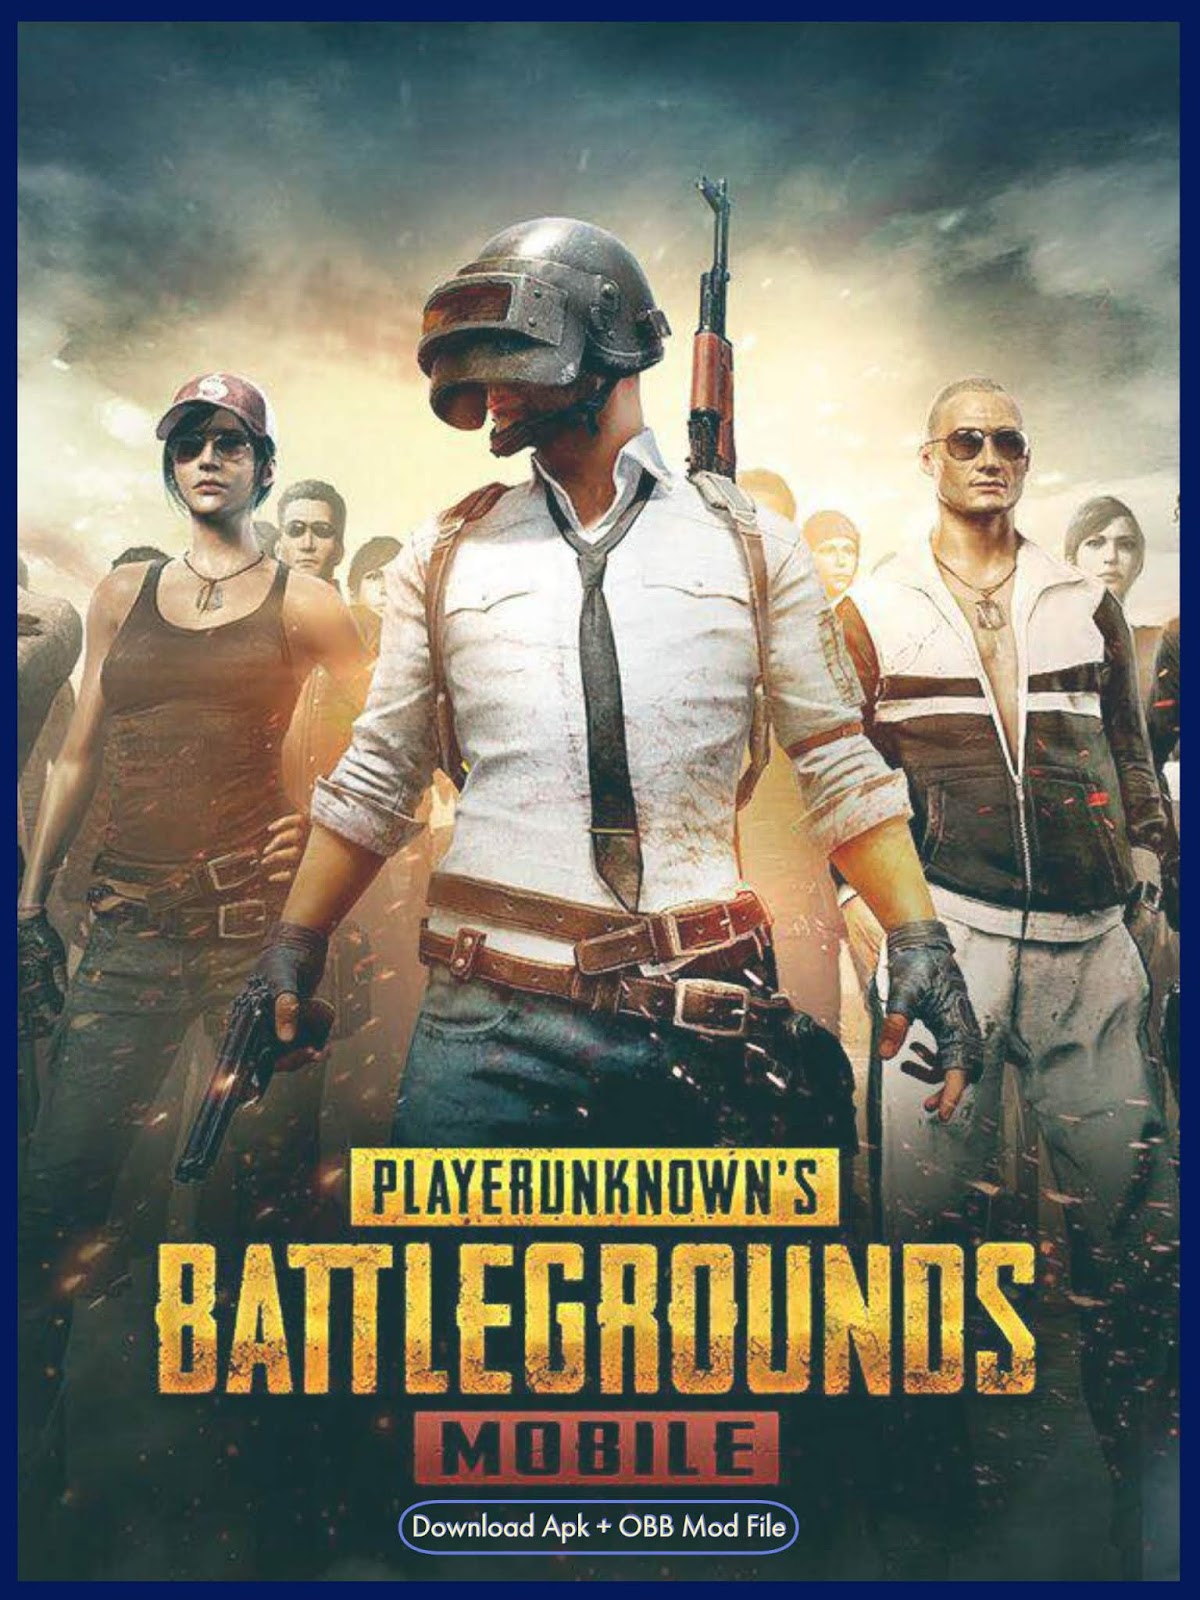 Pubg Mobile Mod Apk Unlimited Health And Unlimited Ammo Apk Obb - why pubg mobile mod apk